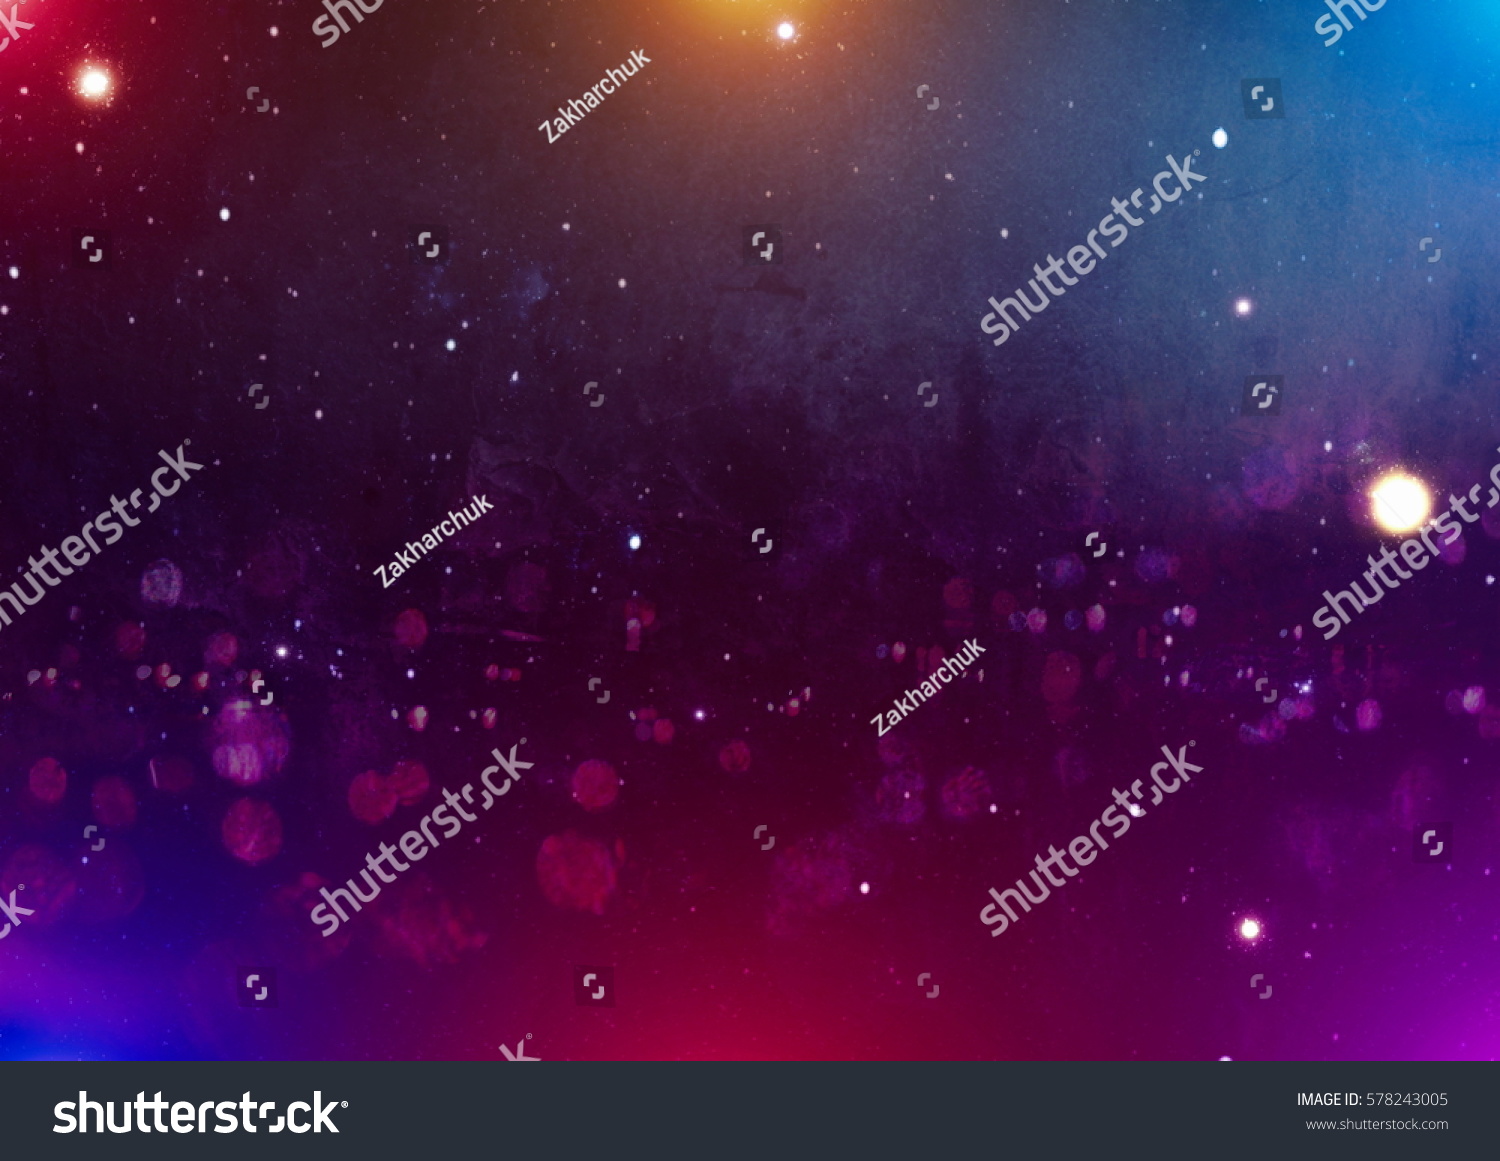 Colorful Starry Night Sky Outer Space Stock Photo (Edit Now) 578243005